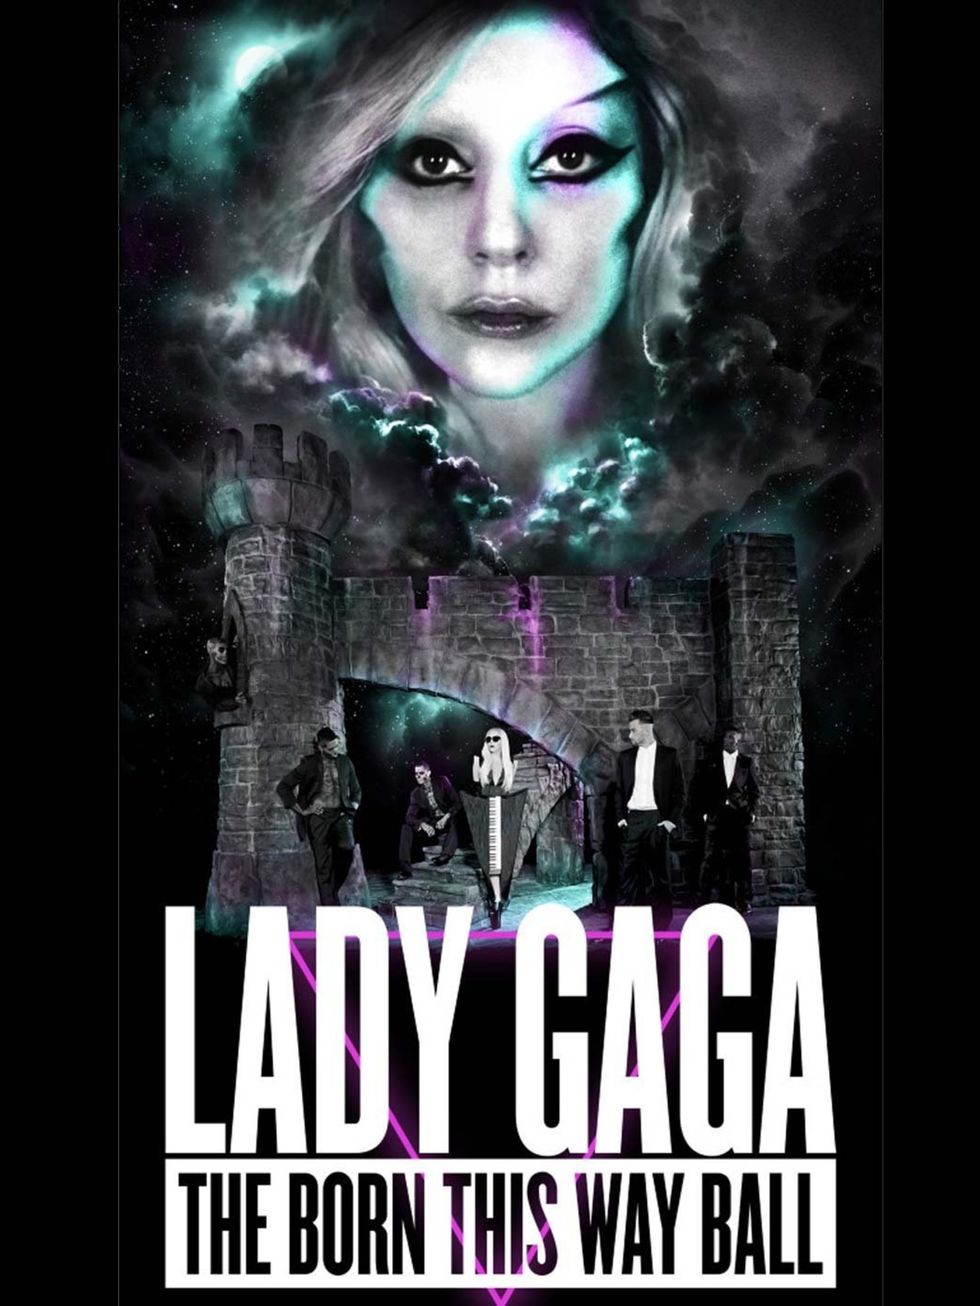 <p>The poster for Lady Gaga's Born This Way Ball tour</p>